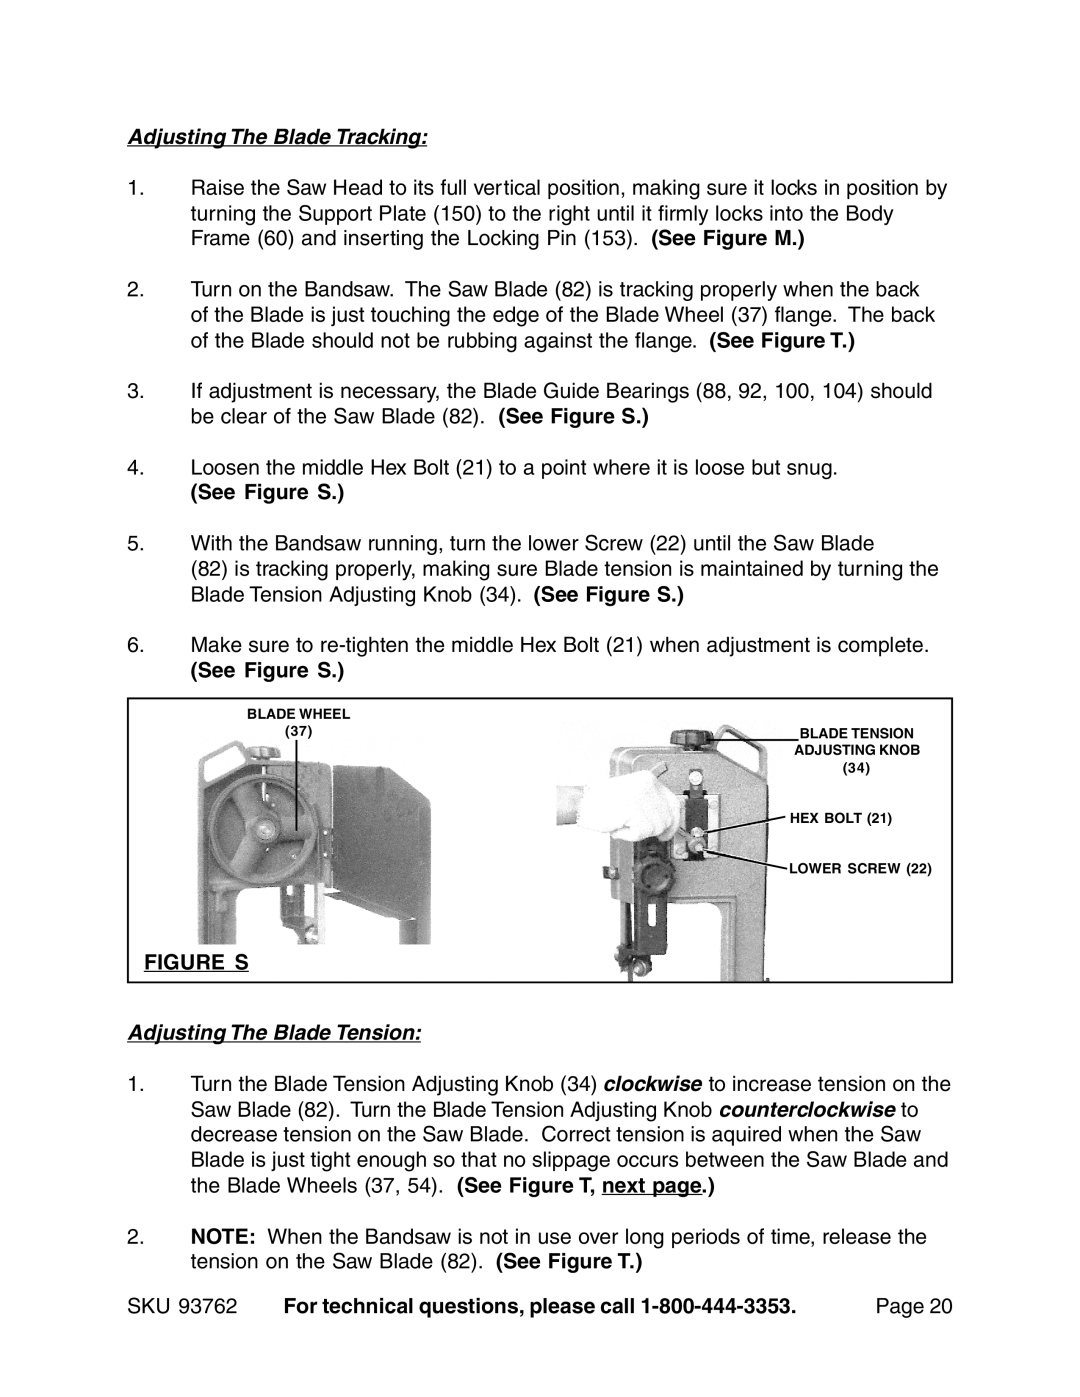 Harbor Freight Tools 93762 operating instructions Adjusting The Blade Tracking, See Figure S, Adjusting The Blade Tension 